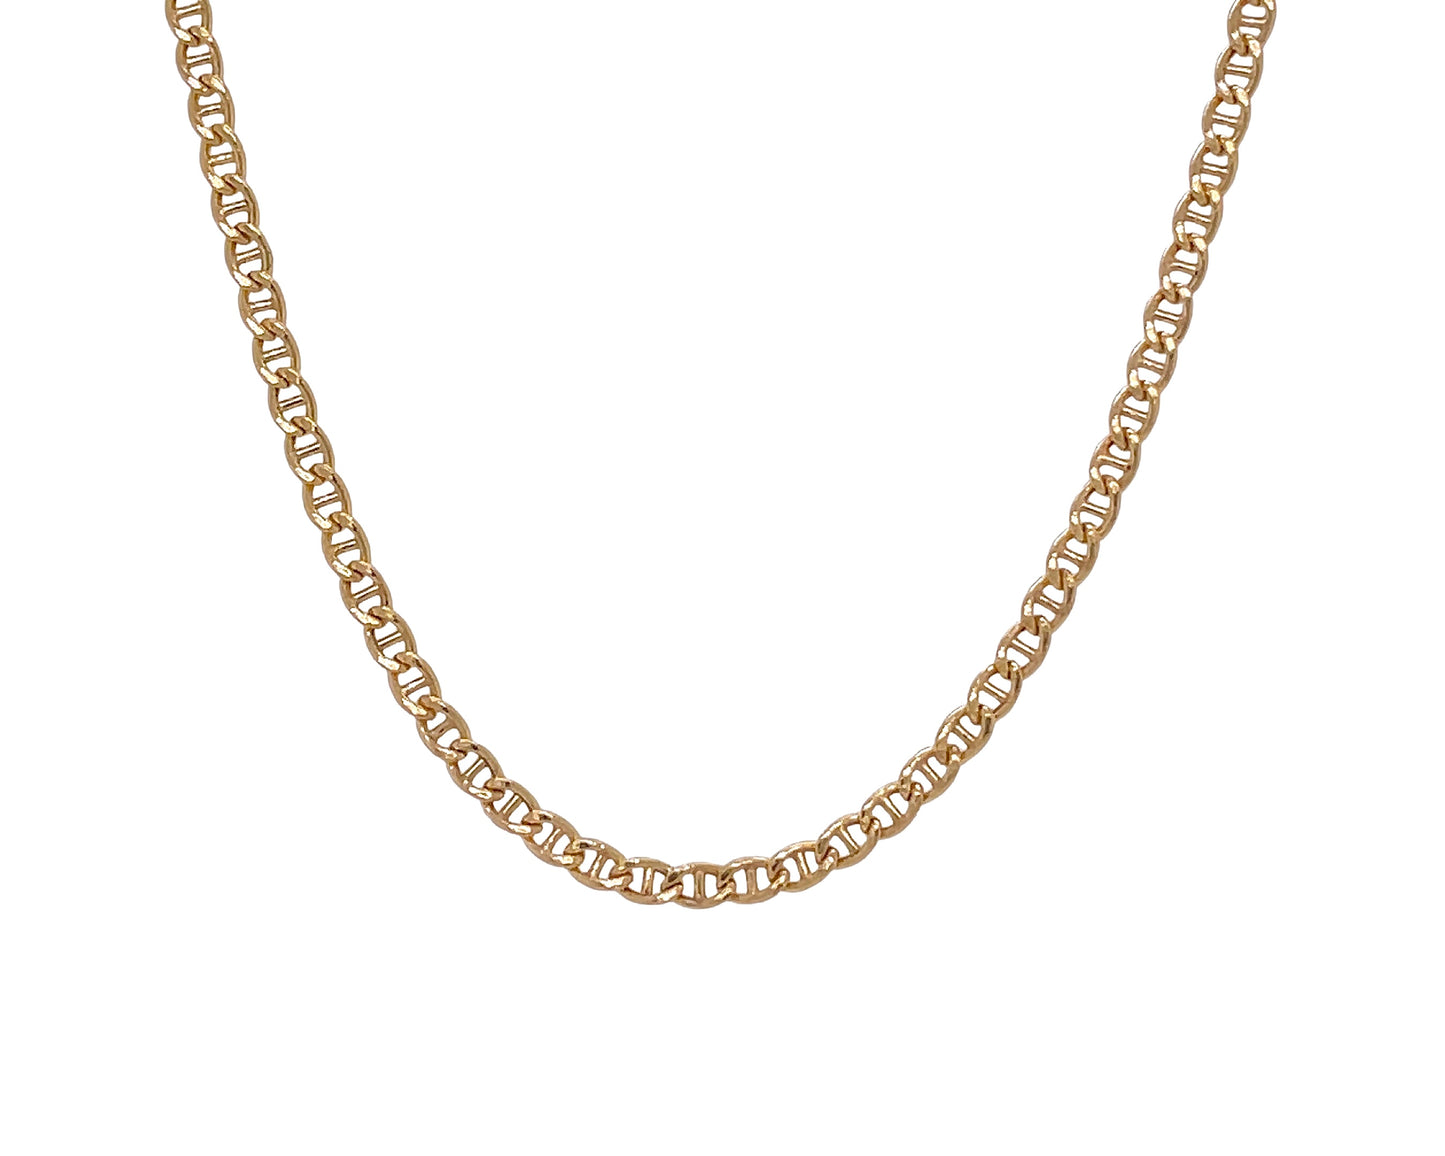 10k yellow gold mariner chain necklace 